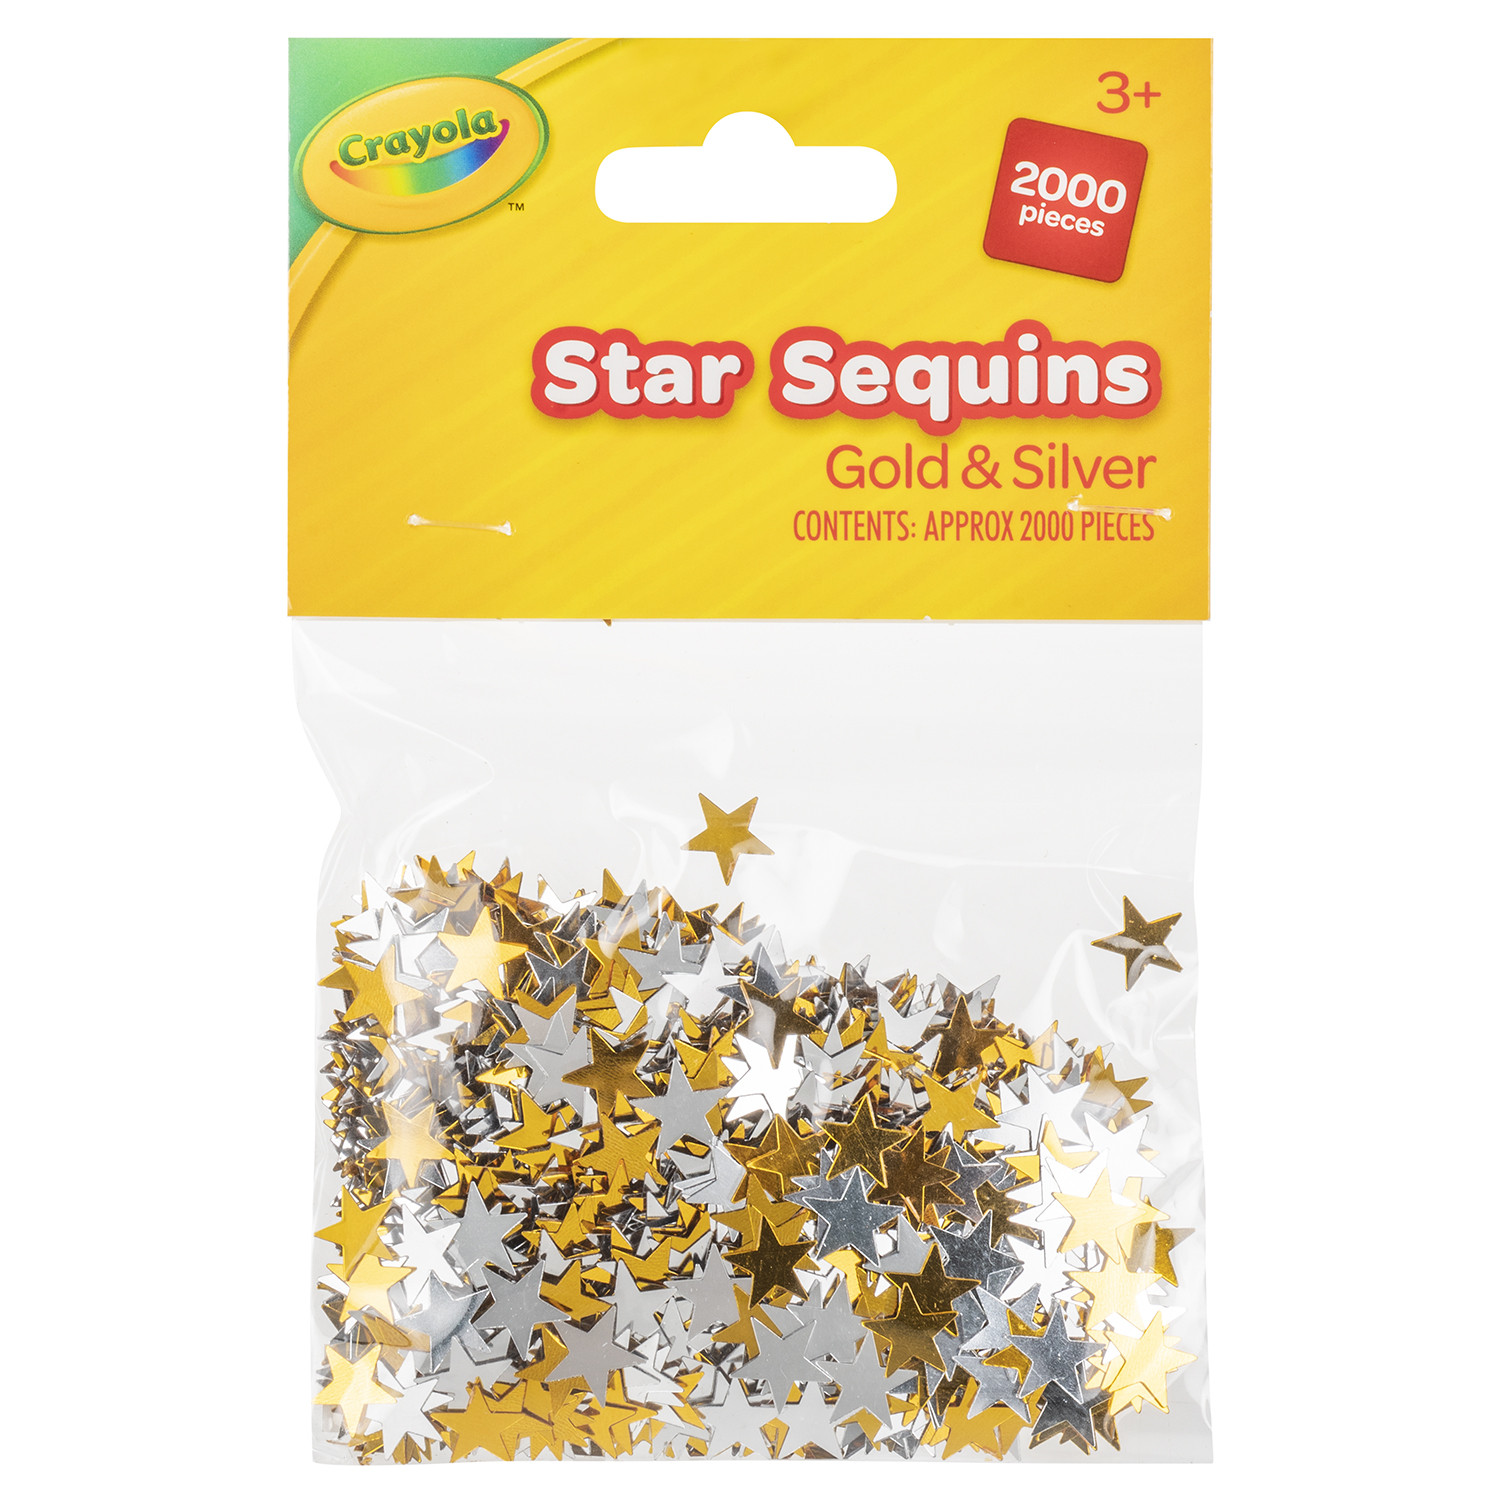 Crayola Star Sequins Gold and Silver Image